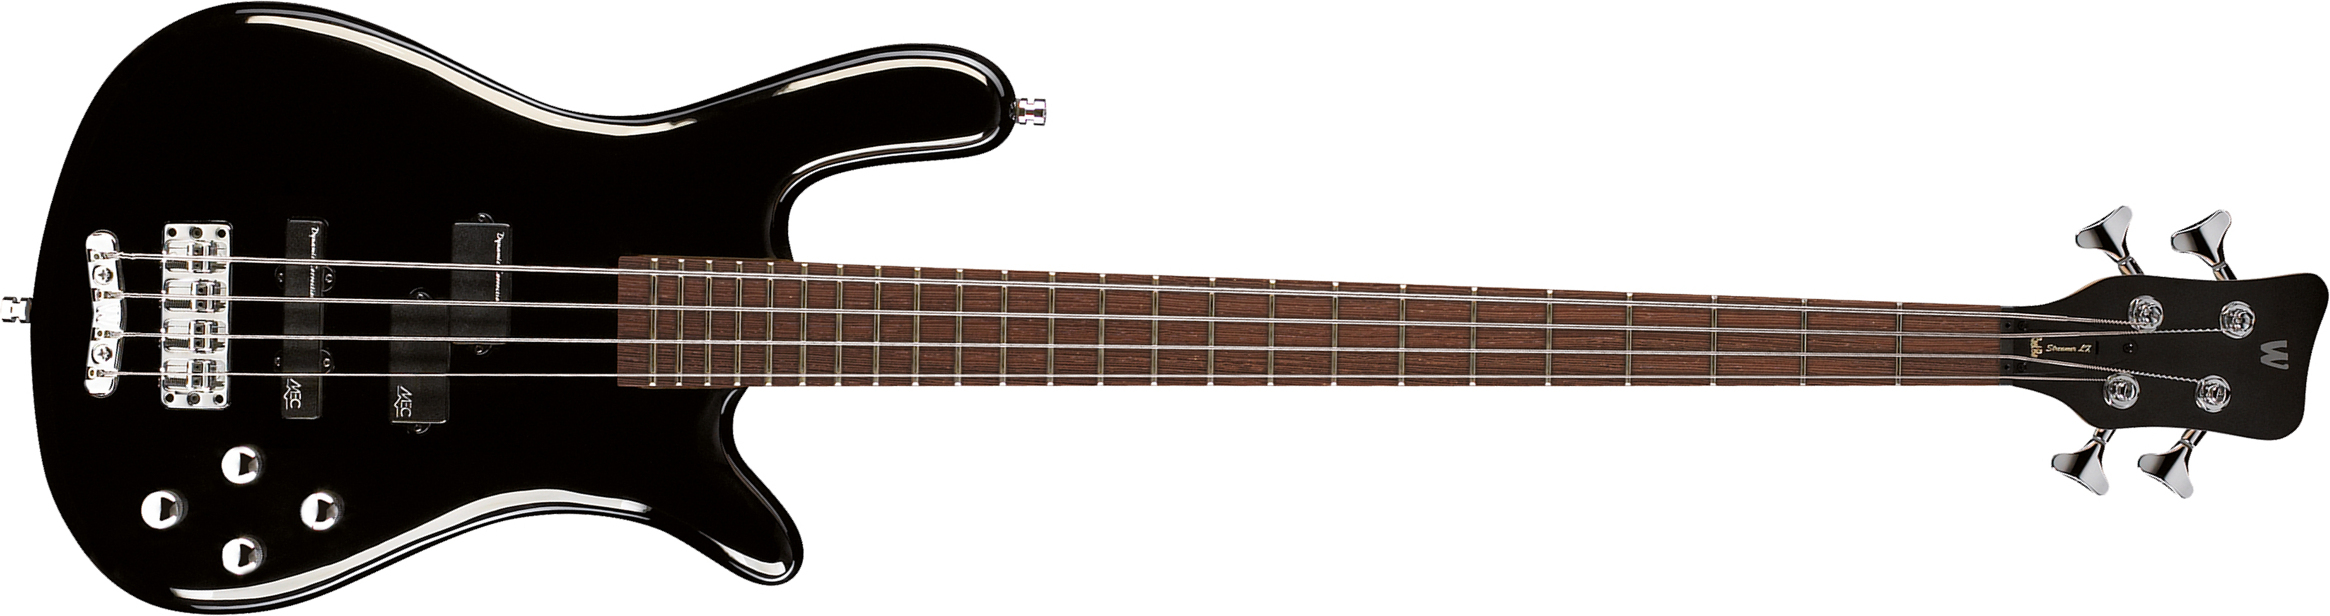 Warwick Streamer Lx4 Rockbass Active Wen - Solid Black - Basse Électrique Solid Body - Main picture